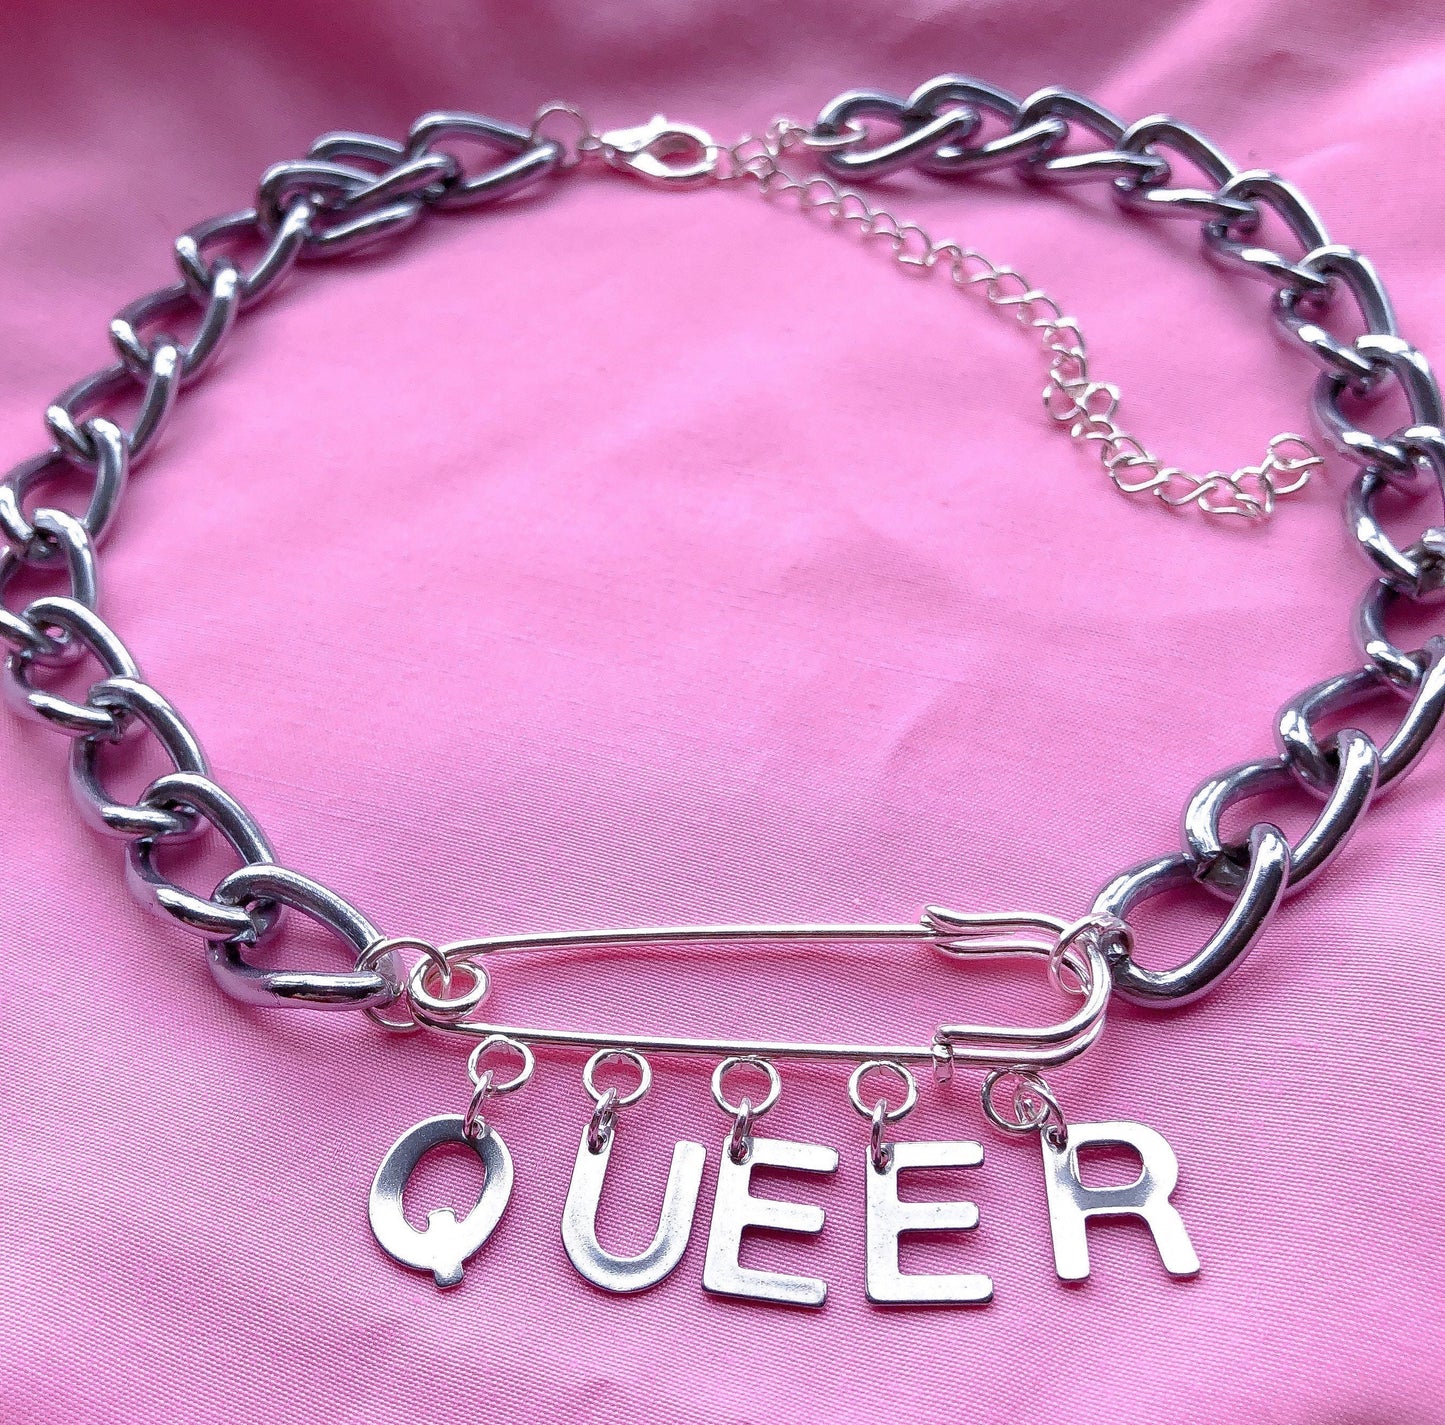 Queer kilt pin chunky chain choker necklace